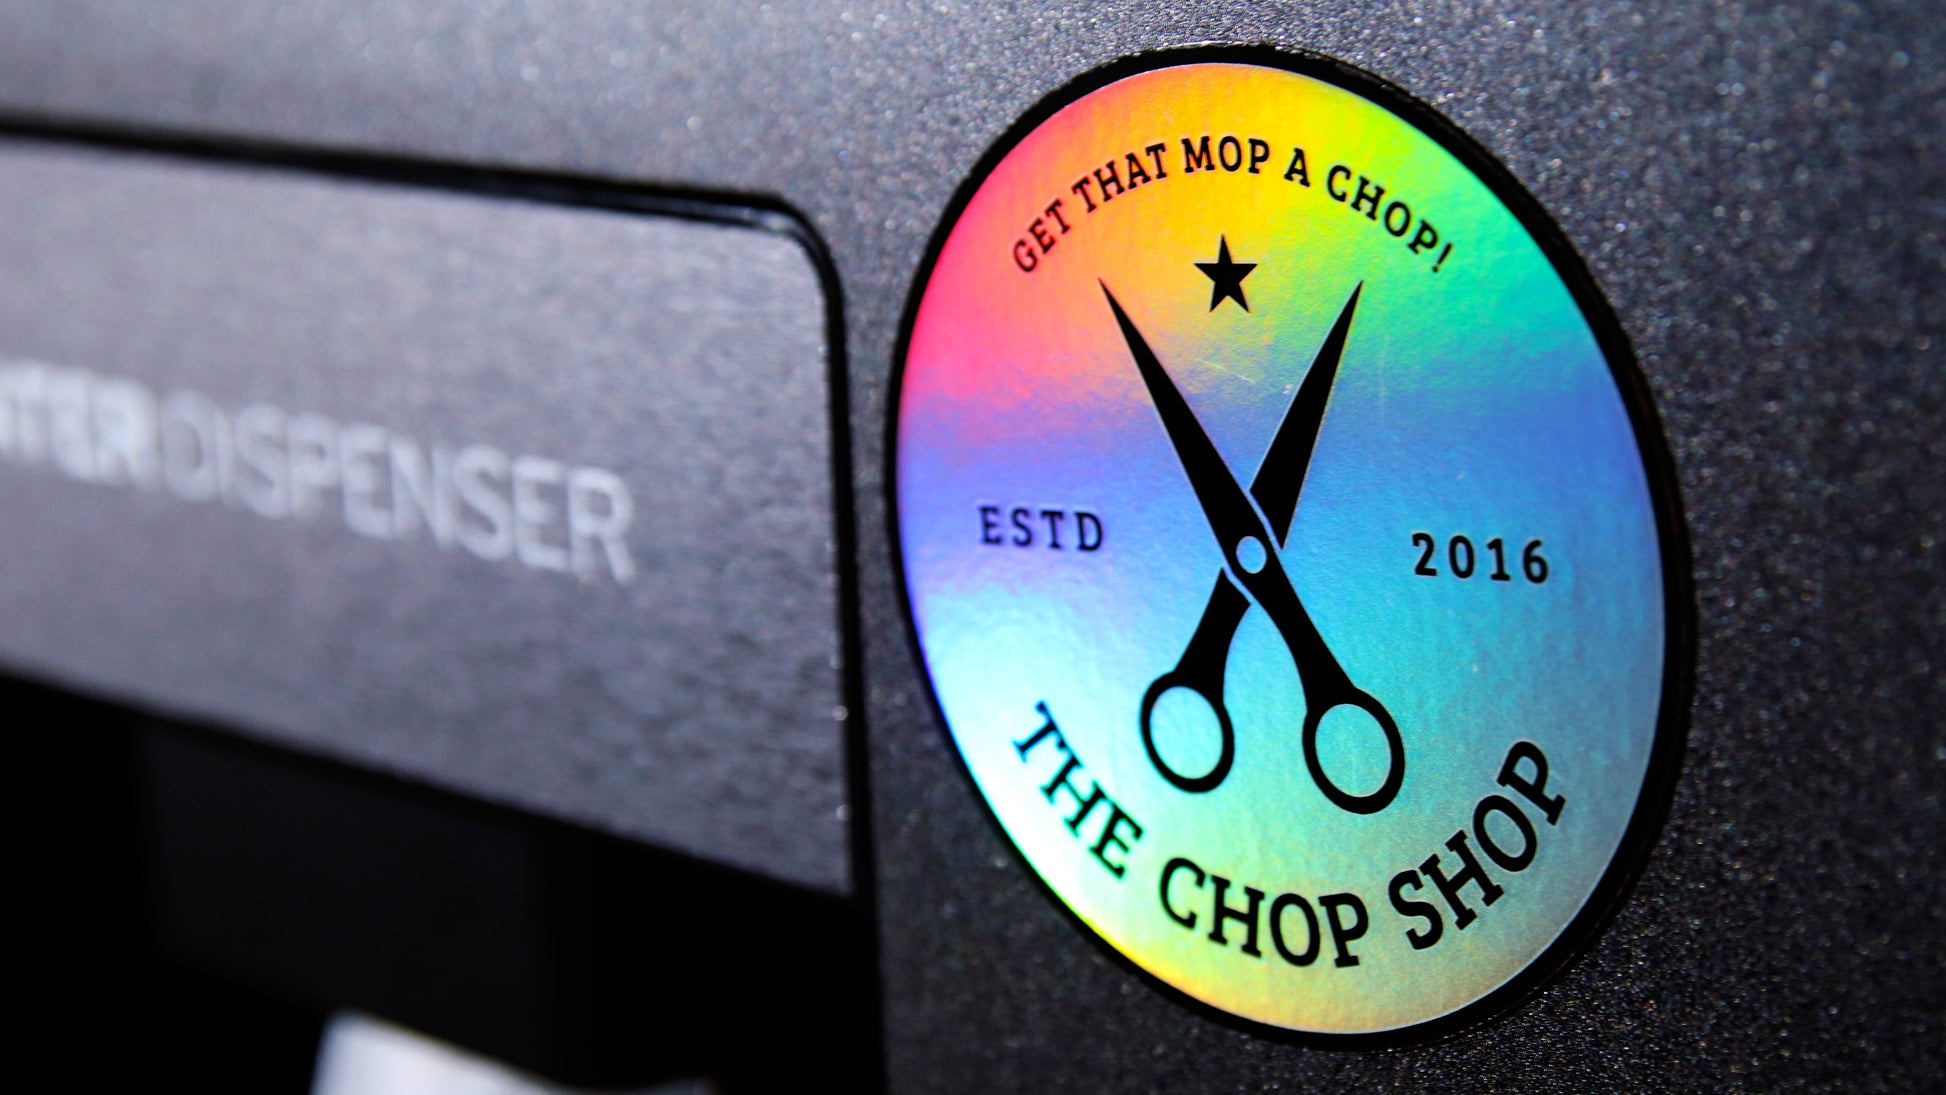 Circle holographic magnet with a Chop Shop logo